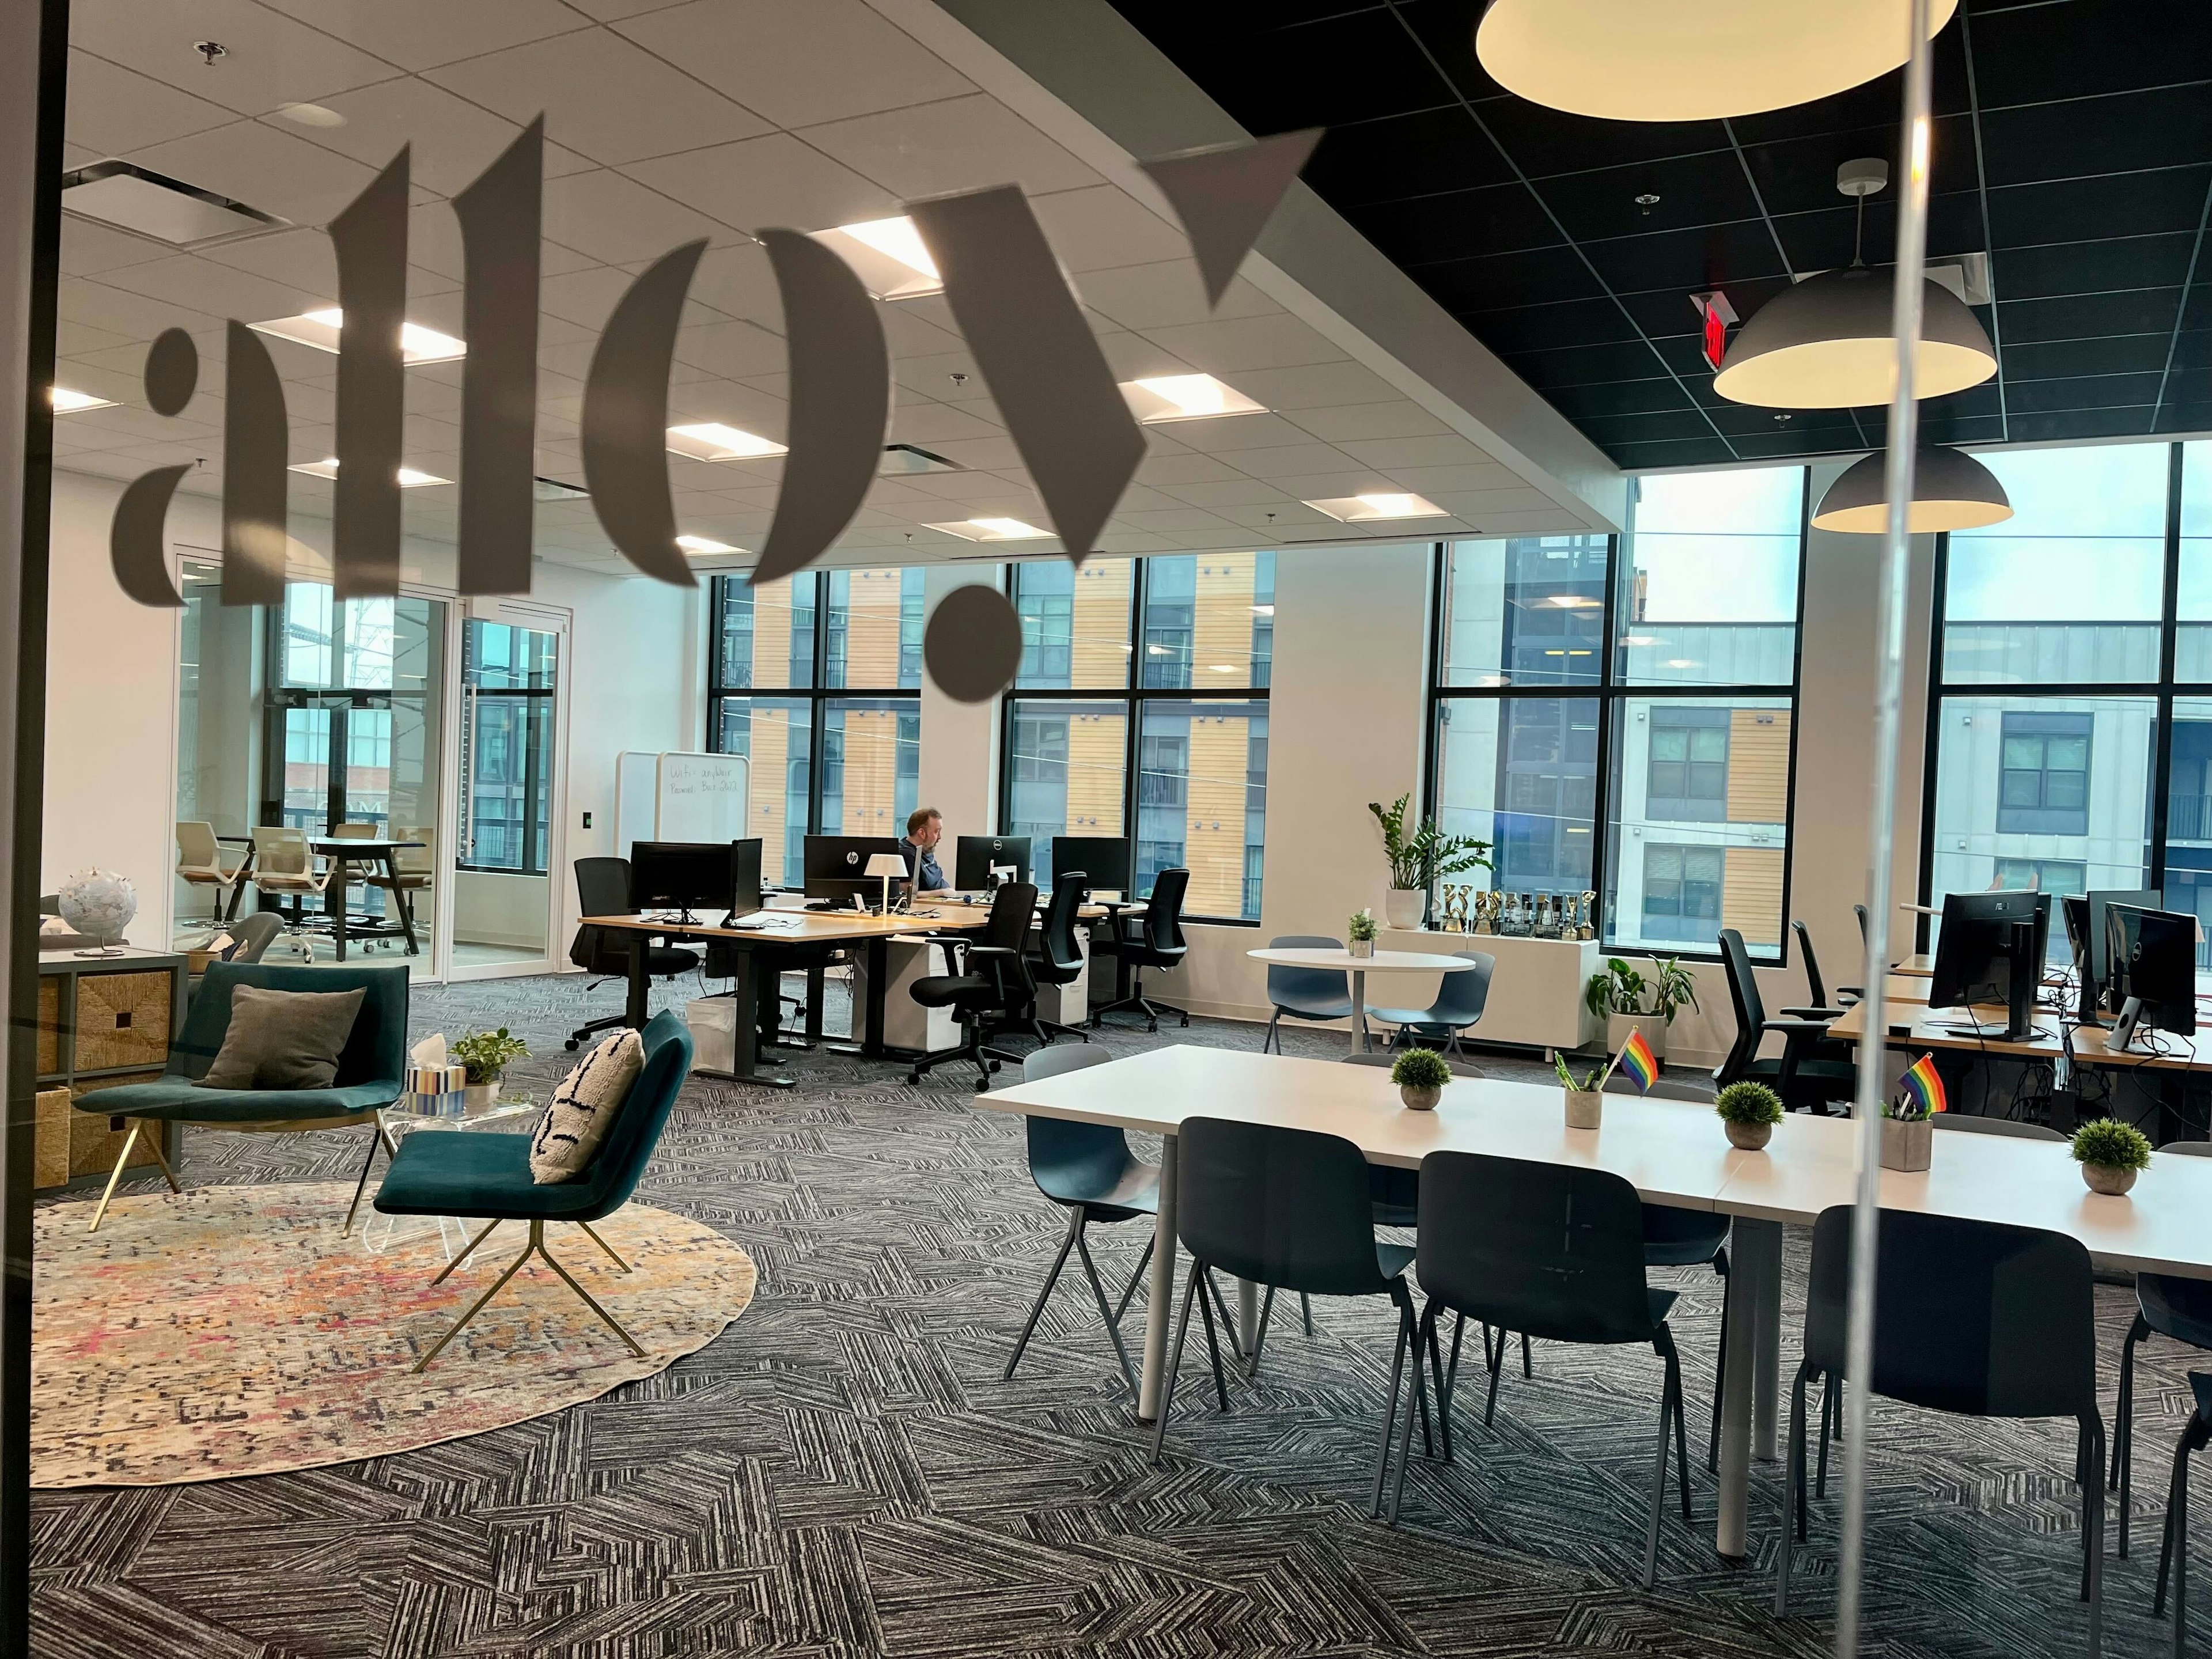 As a top marketing agency in Atlanta, Alloy needed an office space that could expand as fast as we grow. Here’s a sneak peek at our new digs in The Interlock.